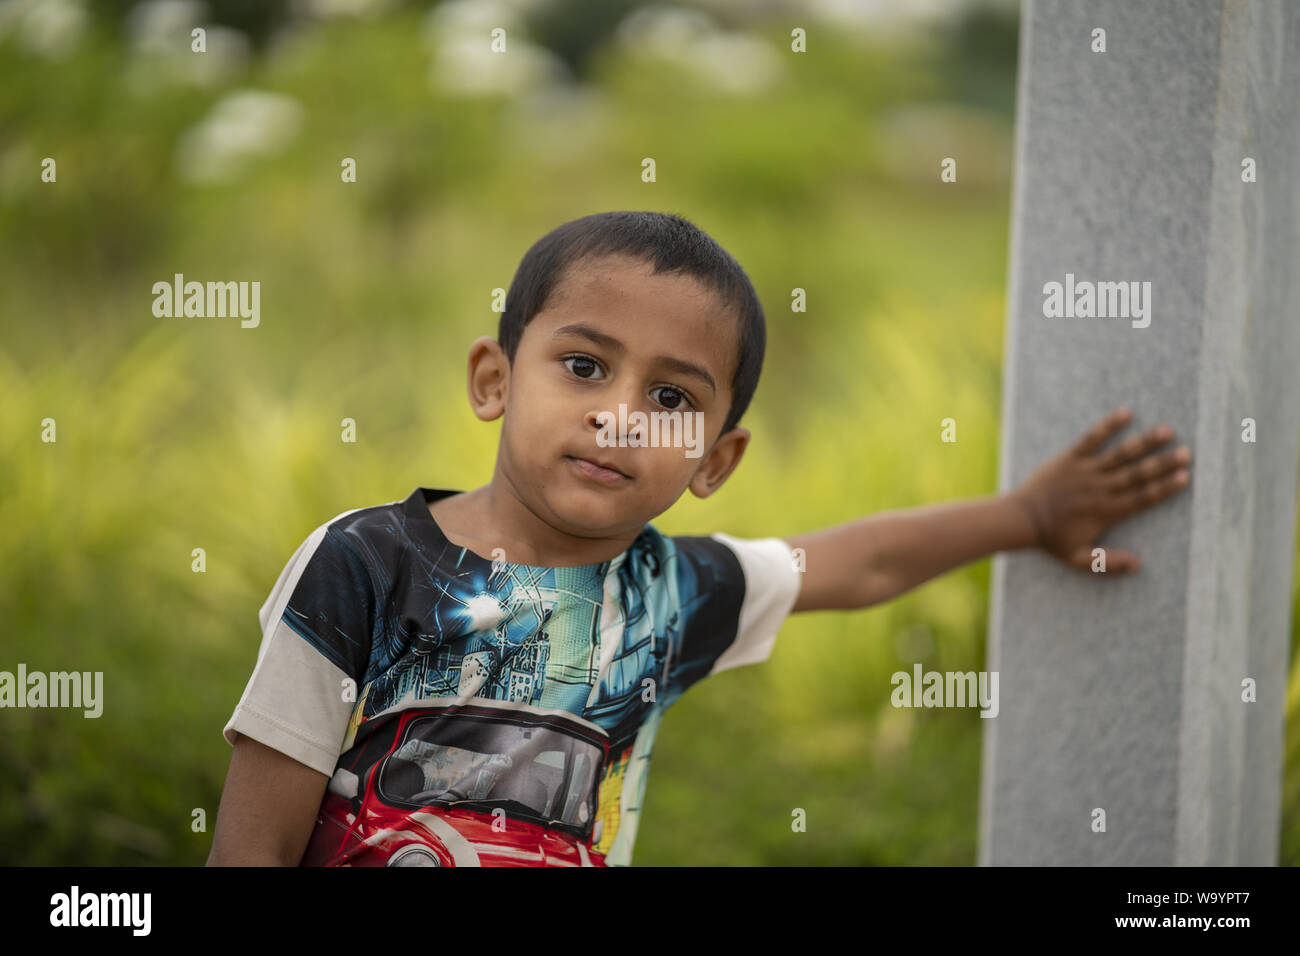 Indian kid closeup standing in park Stock Photo